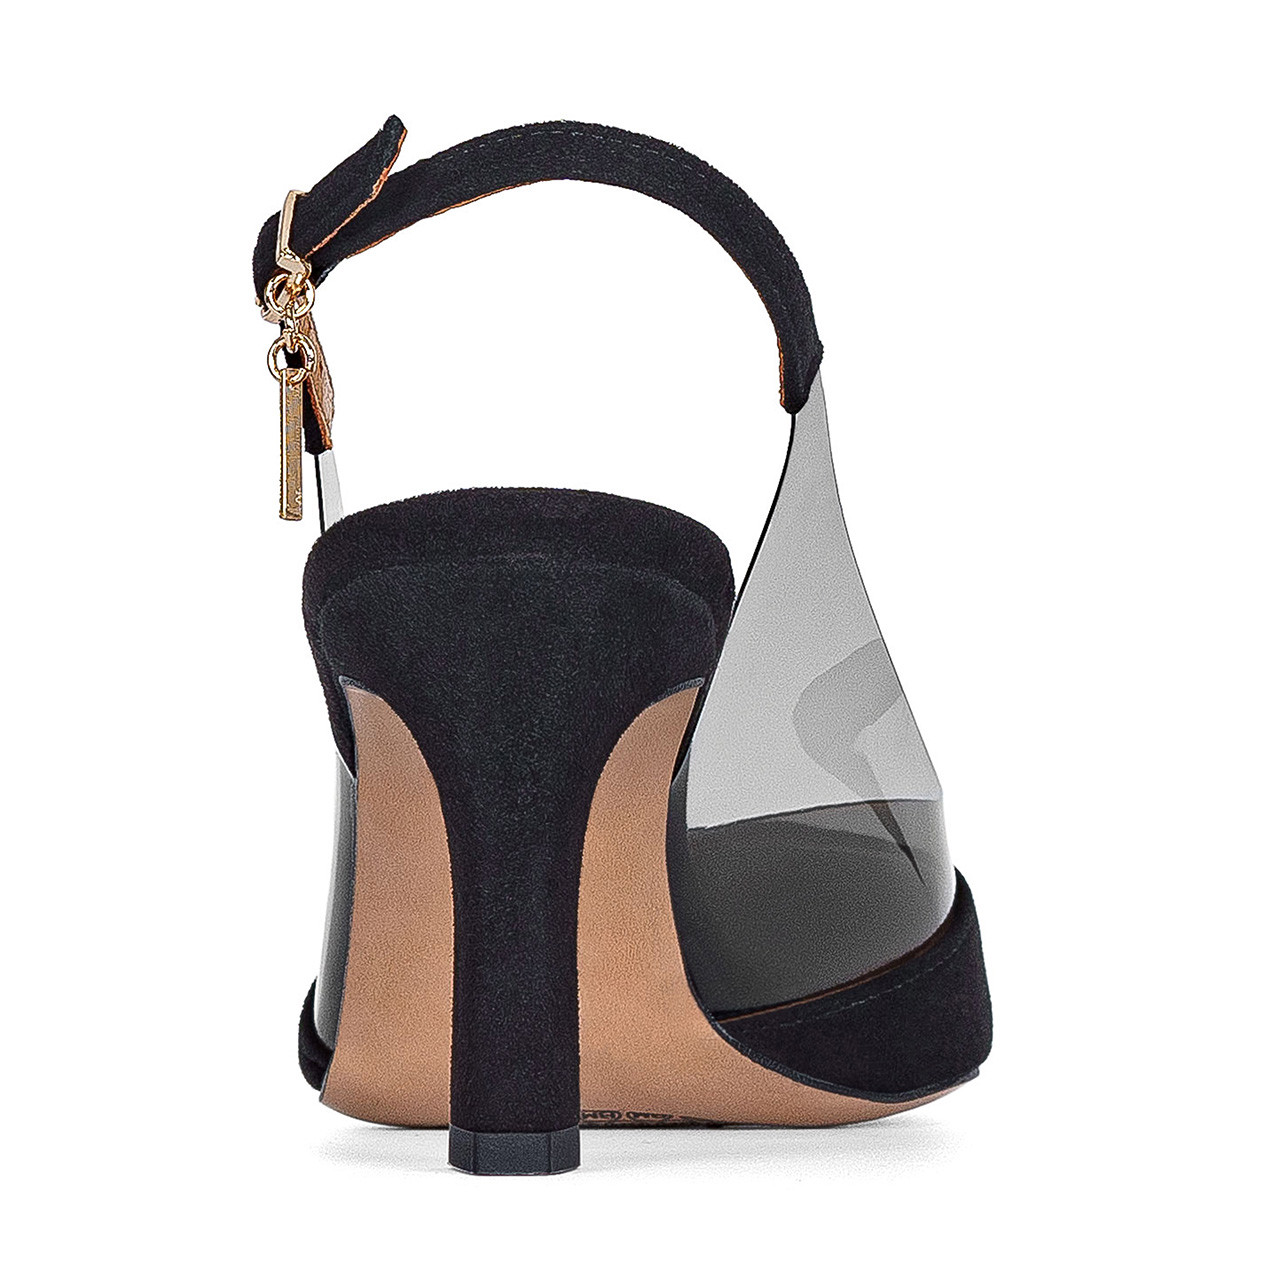 black pumps with an open heel made of natural suede leather combined with transparent silicone